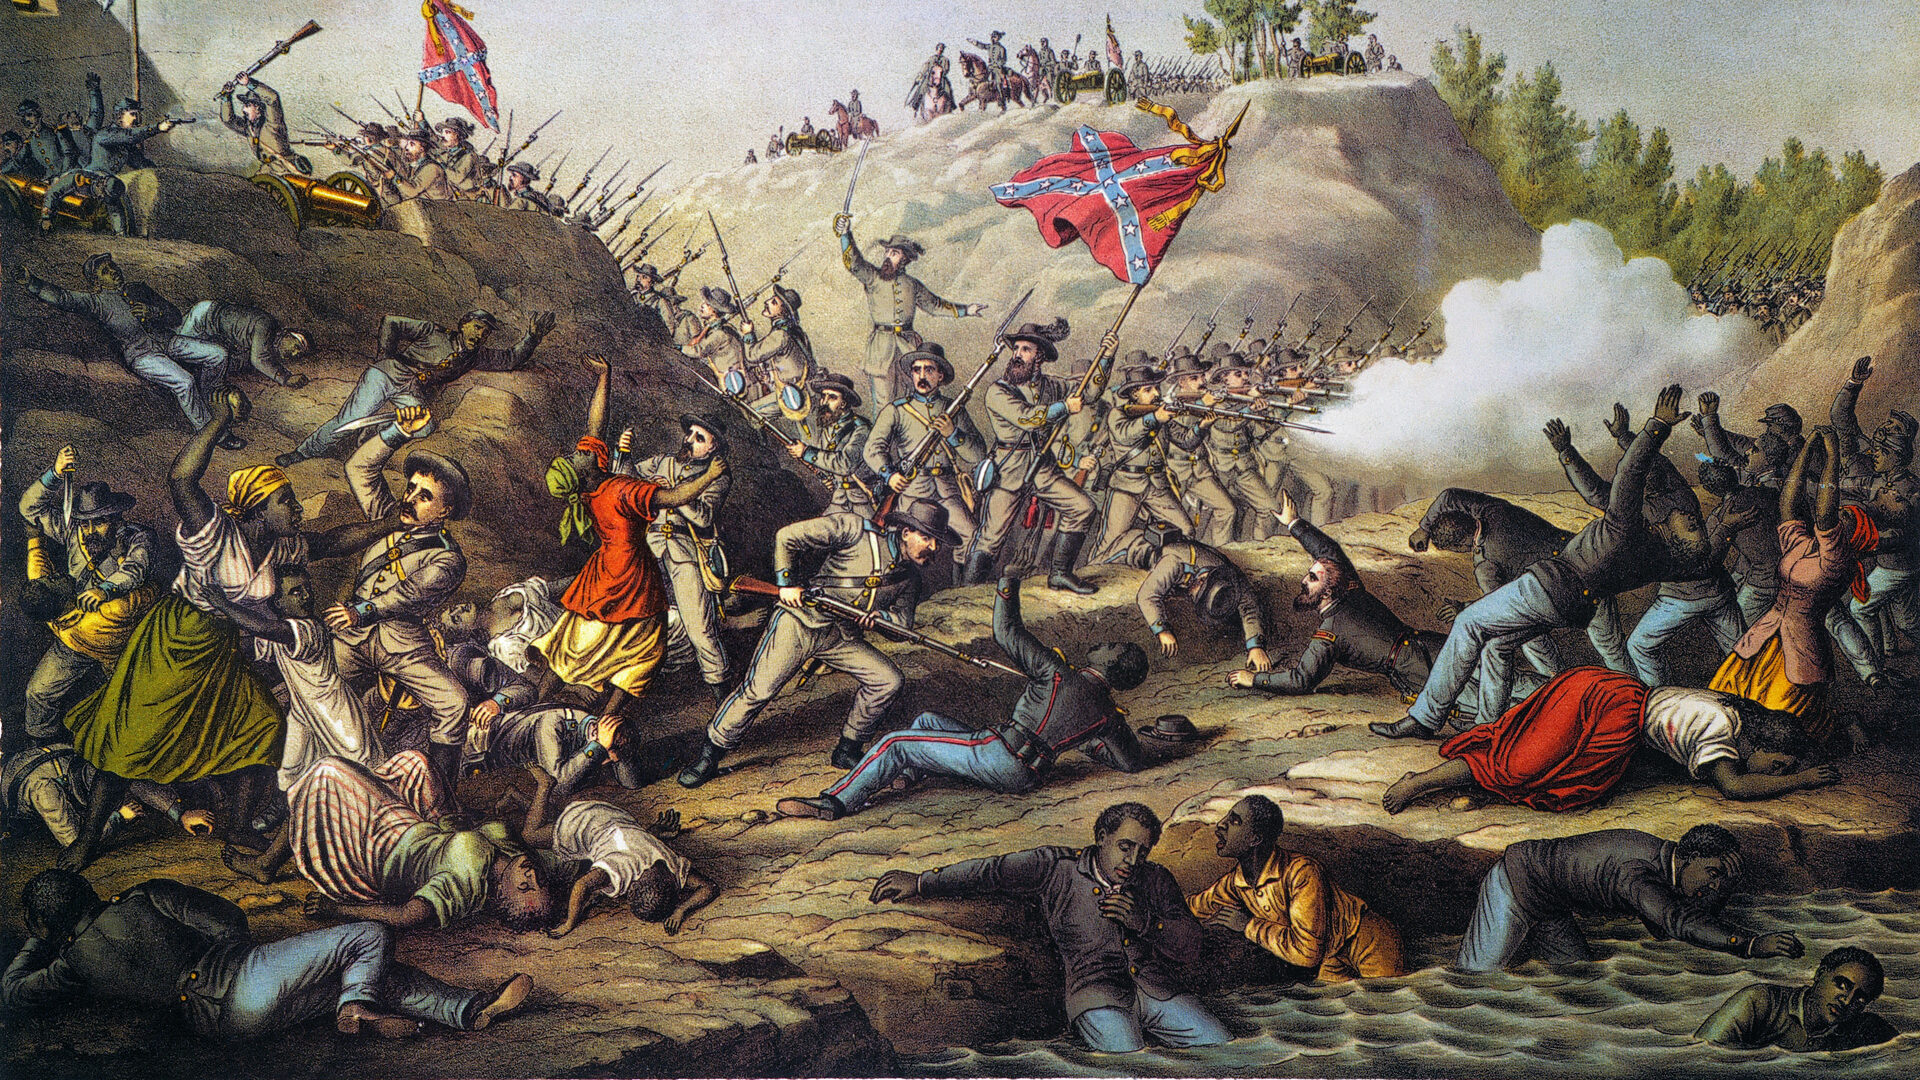 A 19th-century print of the Battle of Fort Pillow conveys the Union sentiment that the Confederate capture of the small redoubt was a massacre. The affair remains one of the most contentious incidents in America’s history.